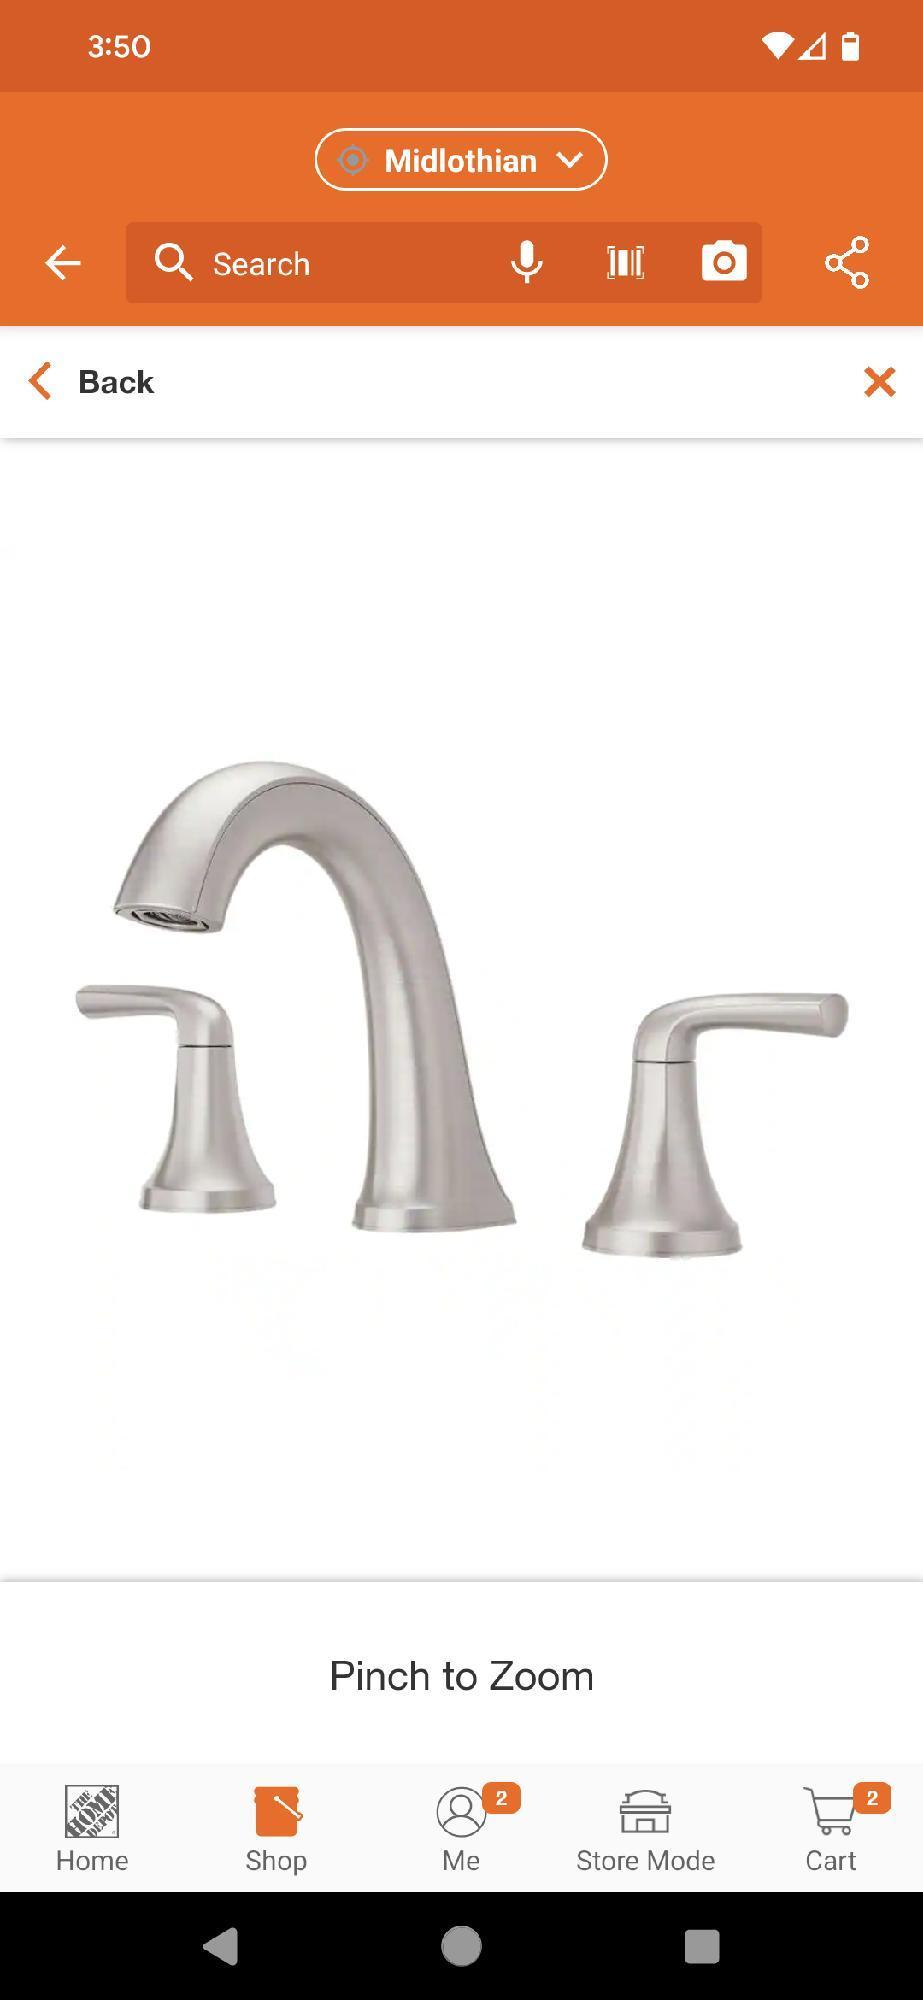 Pfister Ladera 8 in. Widespread Double Handle Bathroom Faucet in Spot Defense Brushed Nickel, Retail